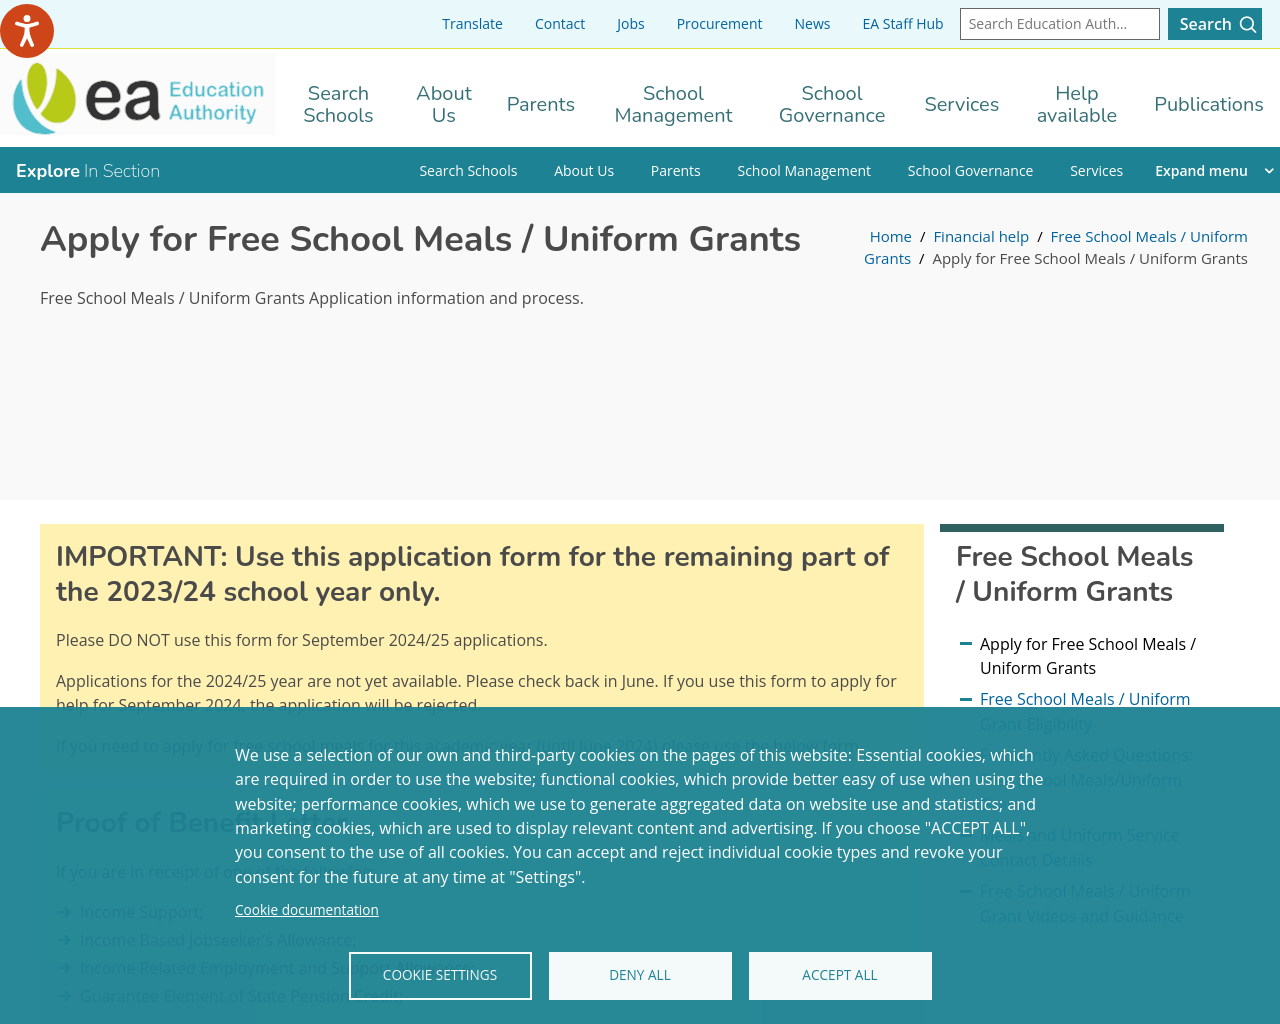 Apply for Free School Meals